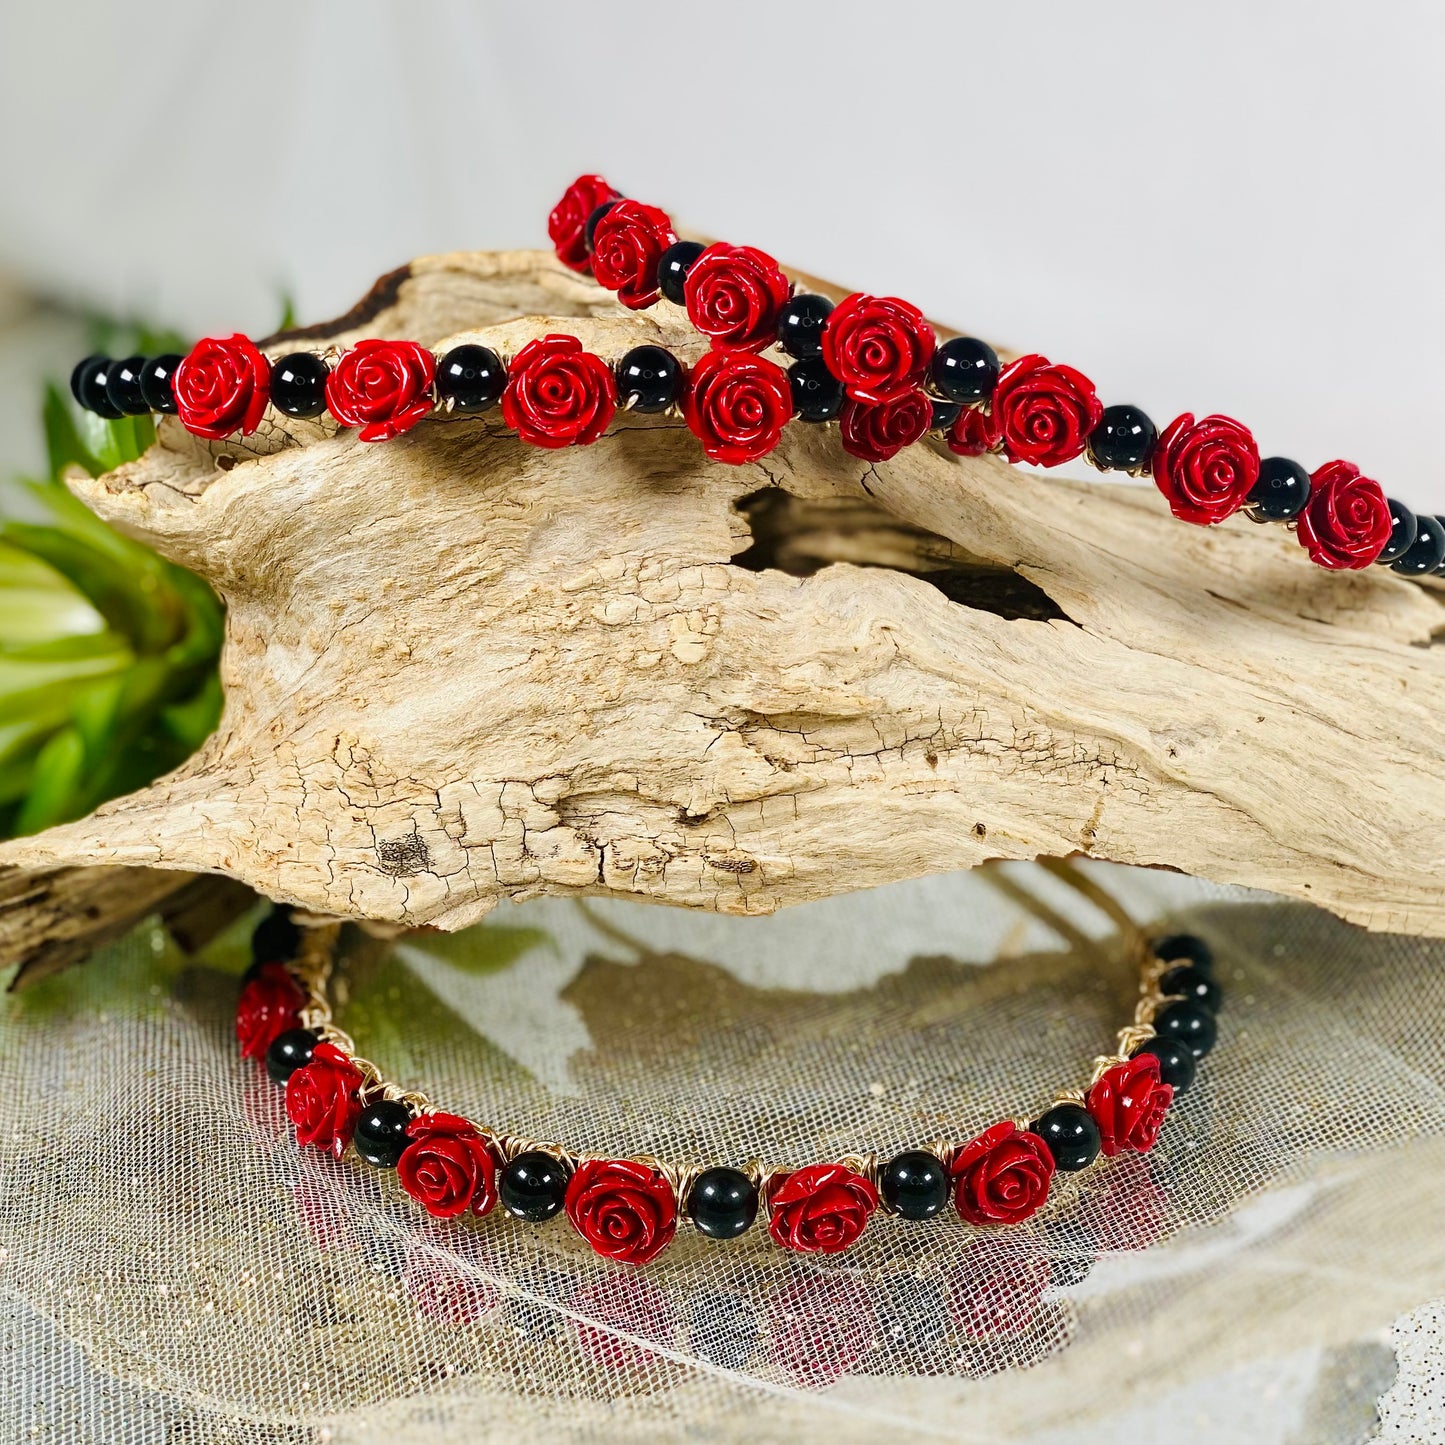 Elegant Black Obsidian Crystal Headband with Red Faux Roses